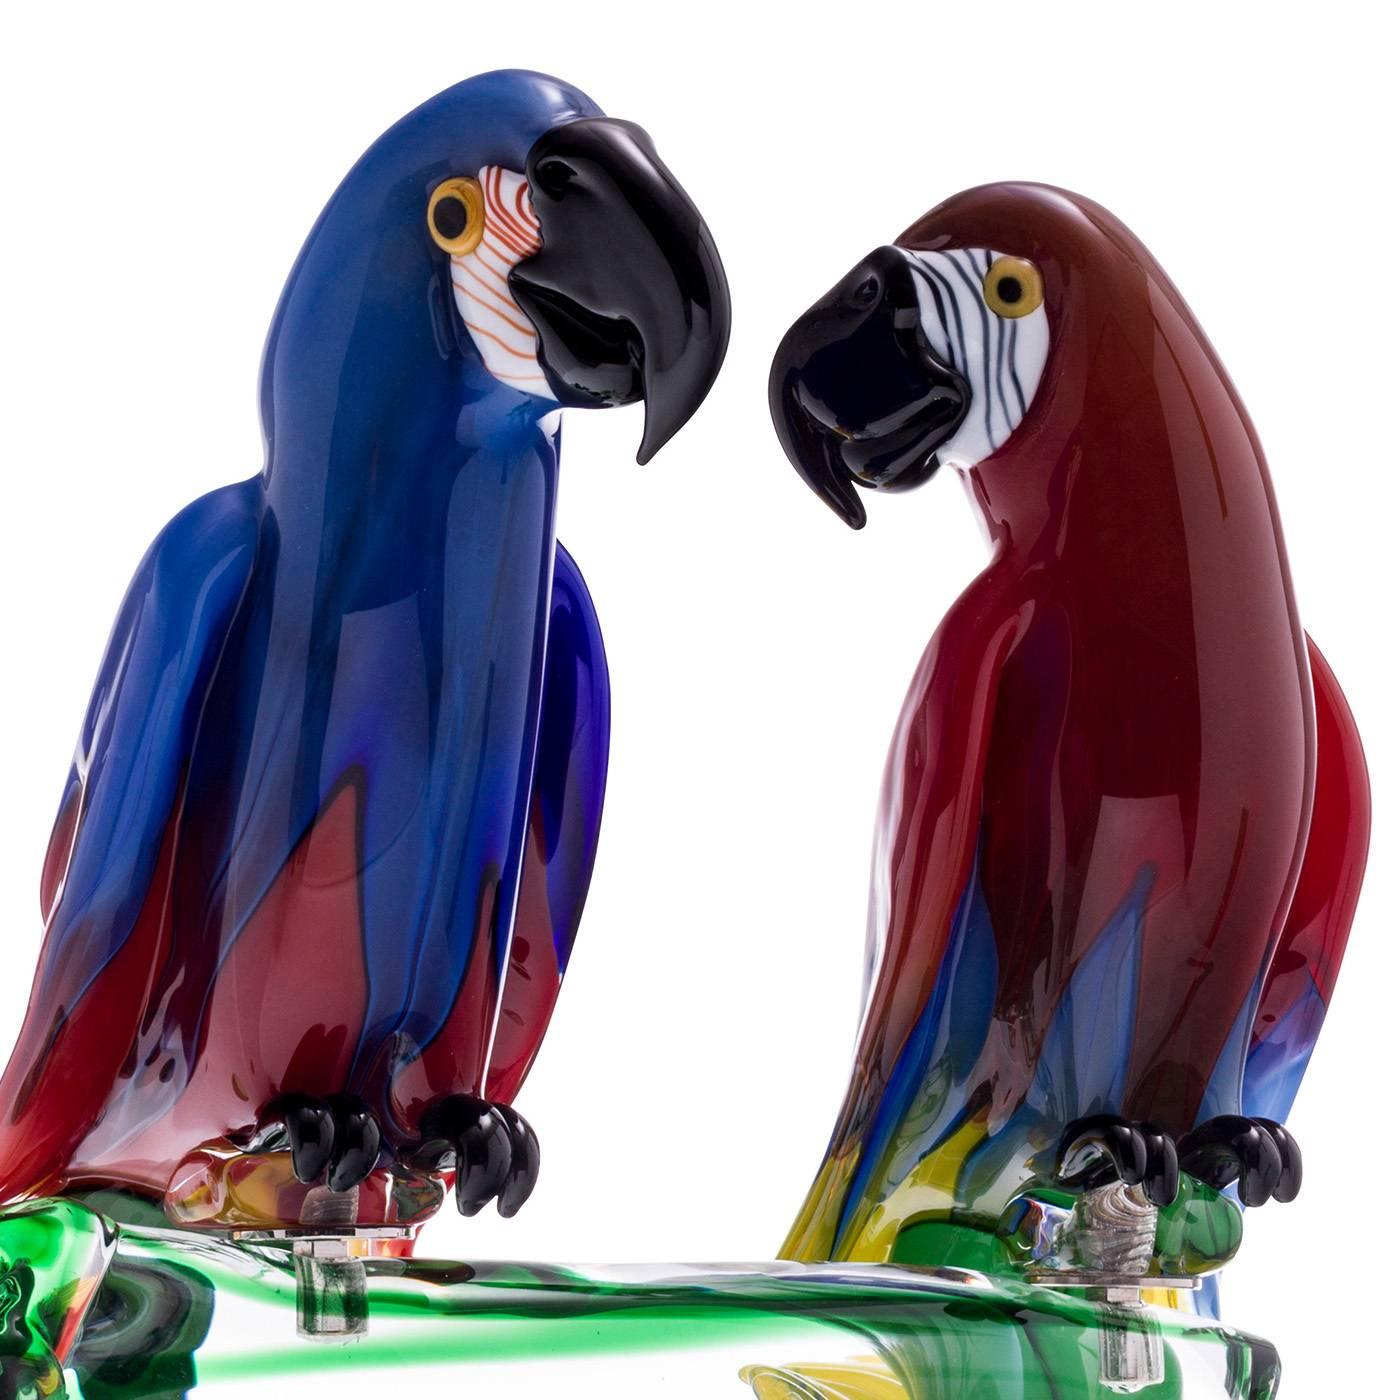 This couple of exceptional Macaw Parrots are made by the master glass blower Zanetti on the island of Murano in Venice. Remarkably animated and colorful, these birds are made of solid glass and perch on a clear glass branch pedestal. The birds have